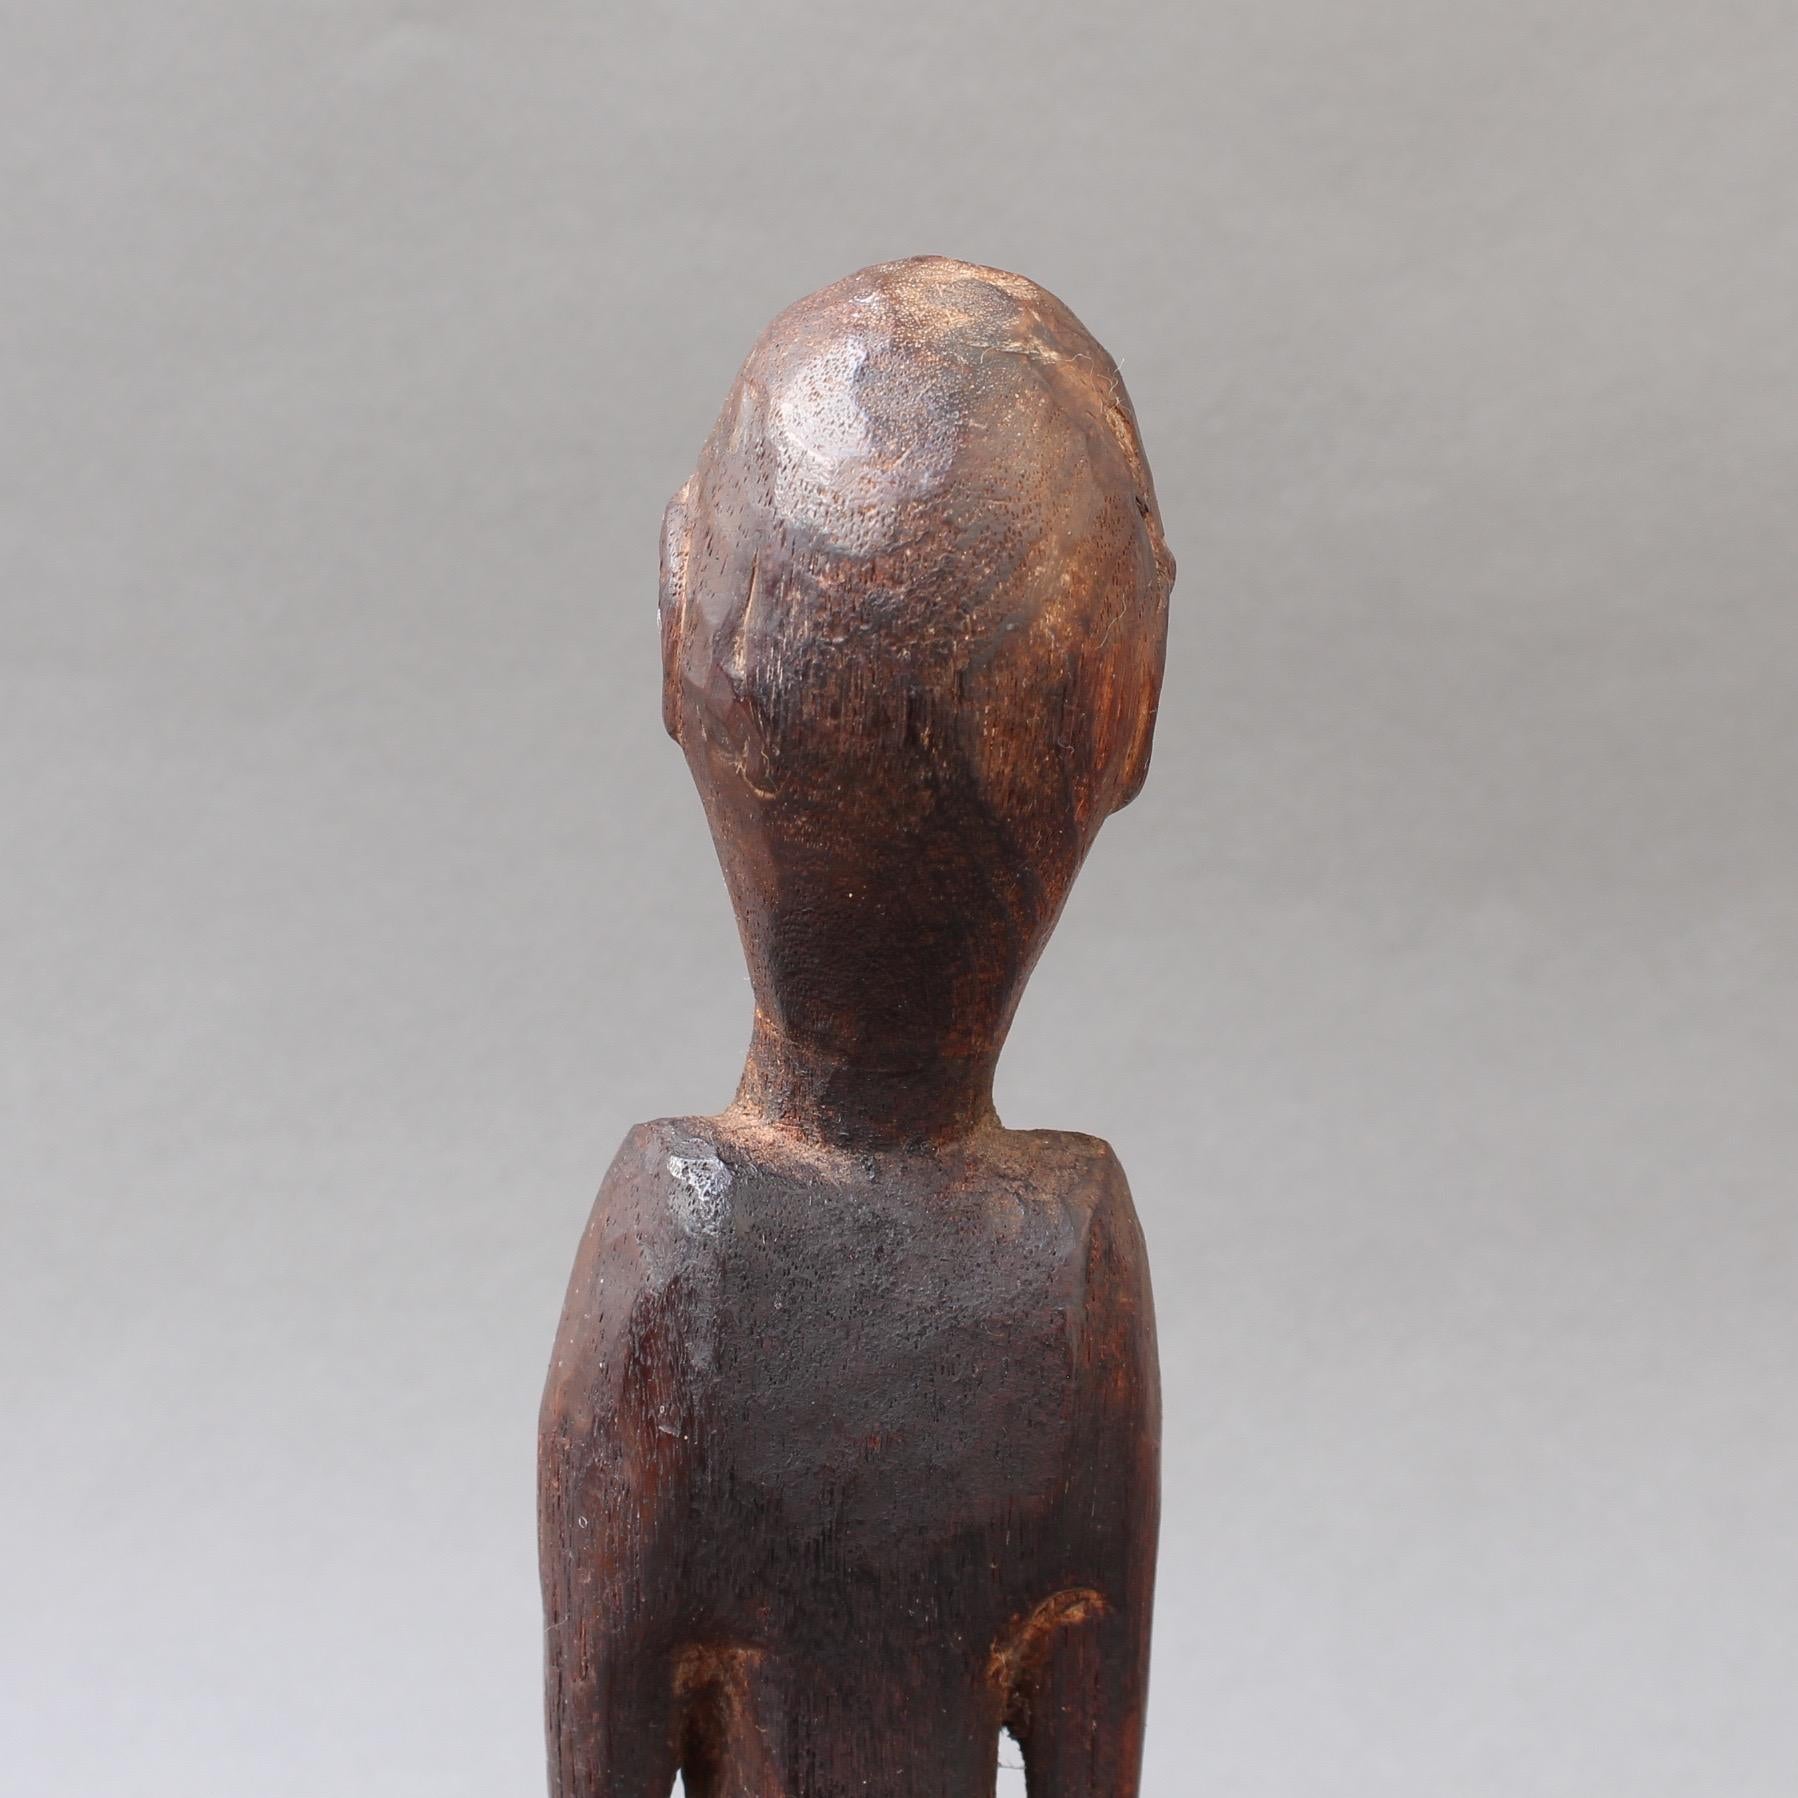 Wooden Sculpture or Carving of Sitting Figure from Sumba Island, Indonesia 5